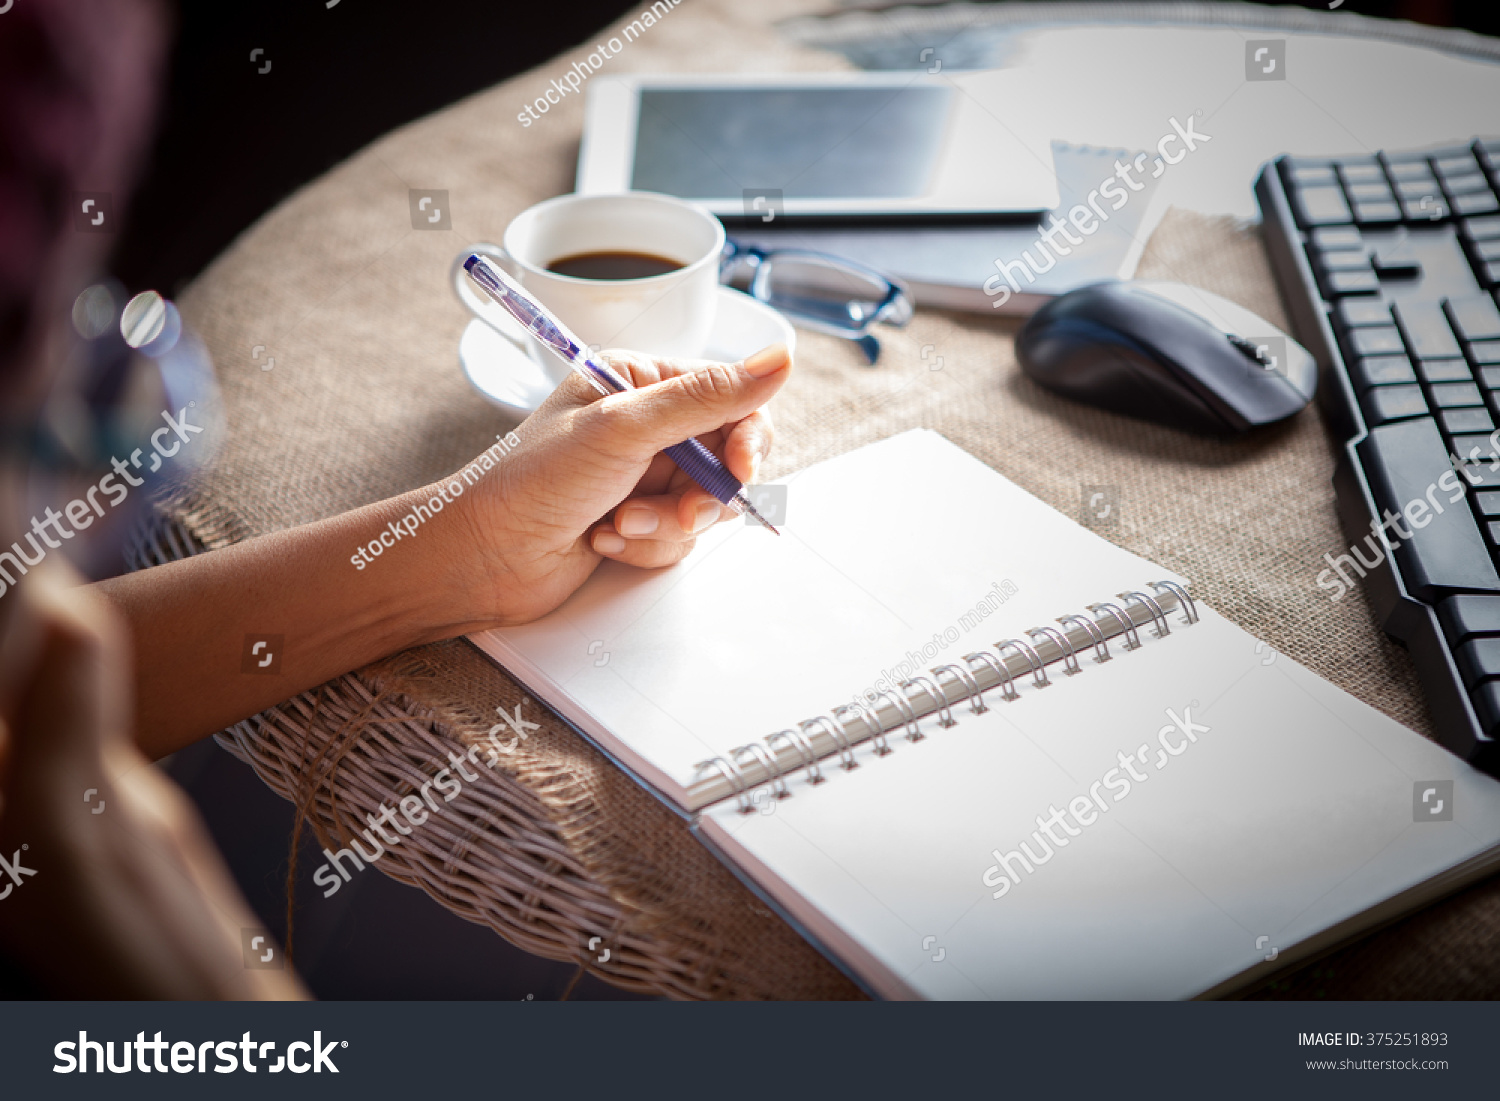 woman left hand writing on paper book ,on table shot #375251893